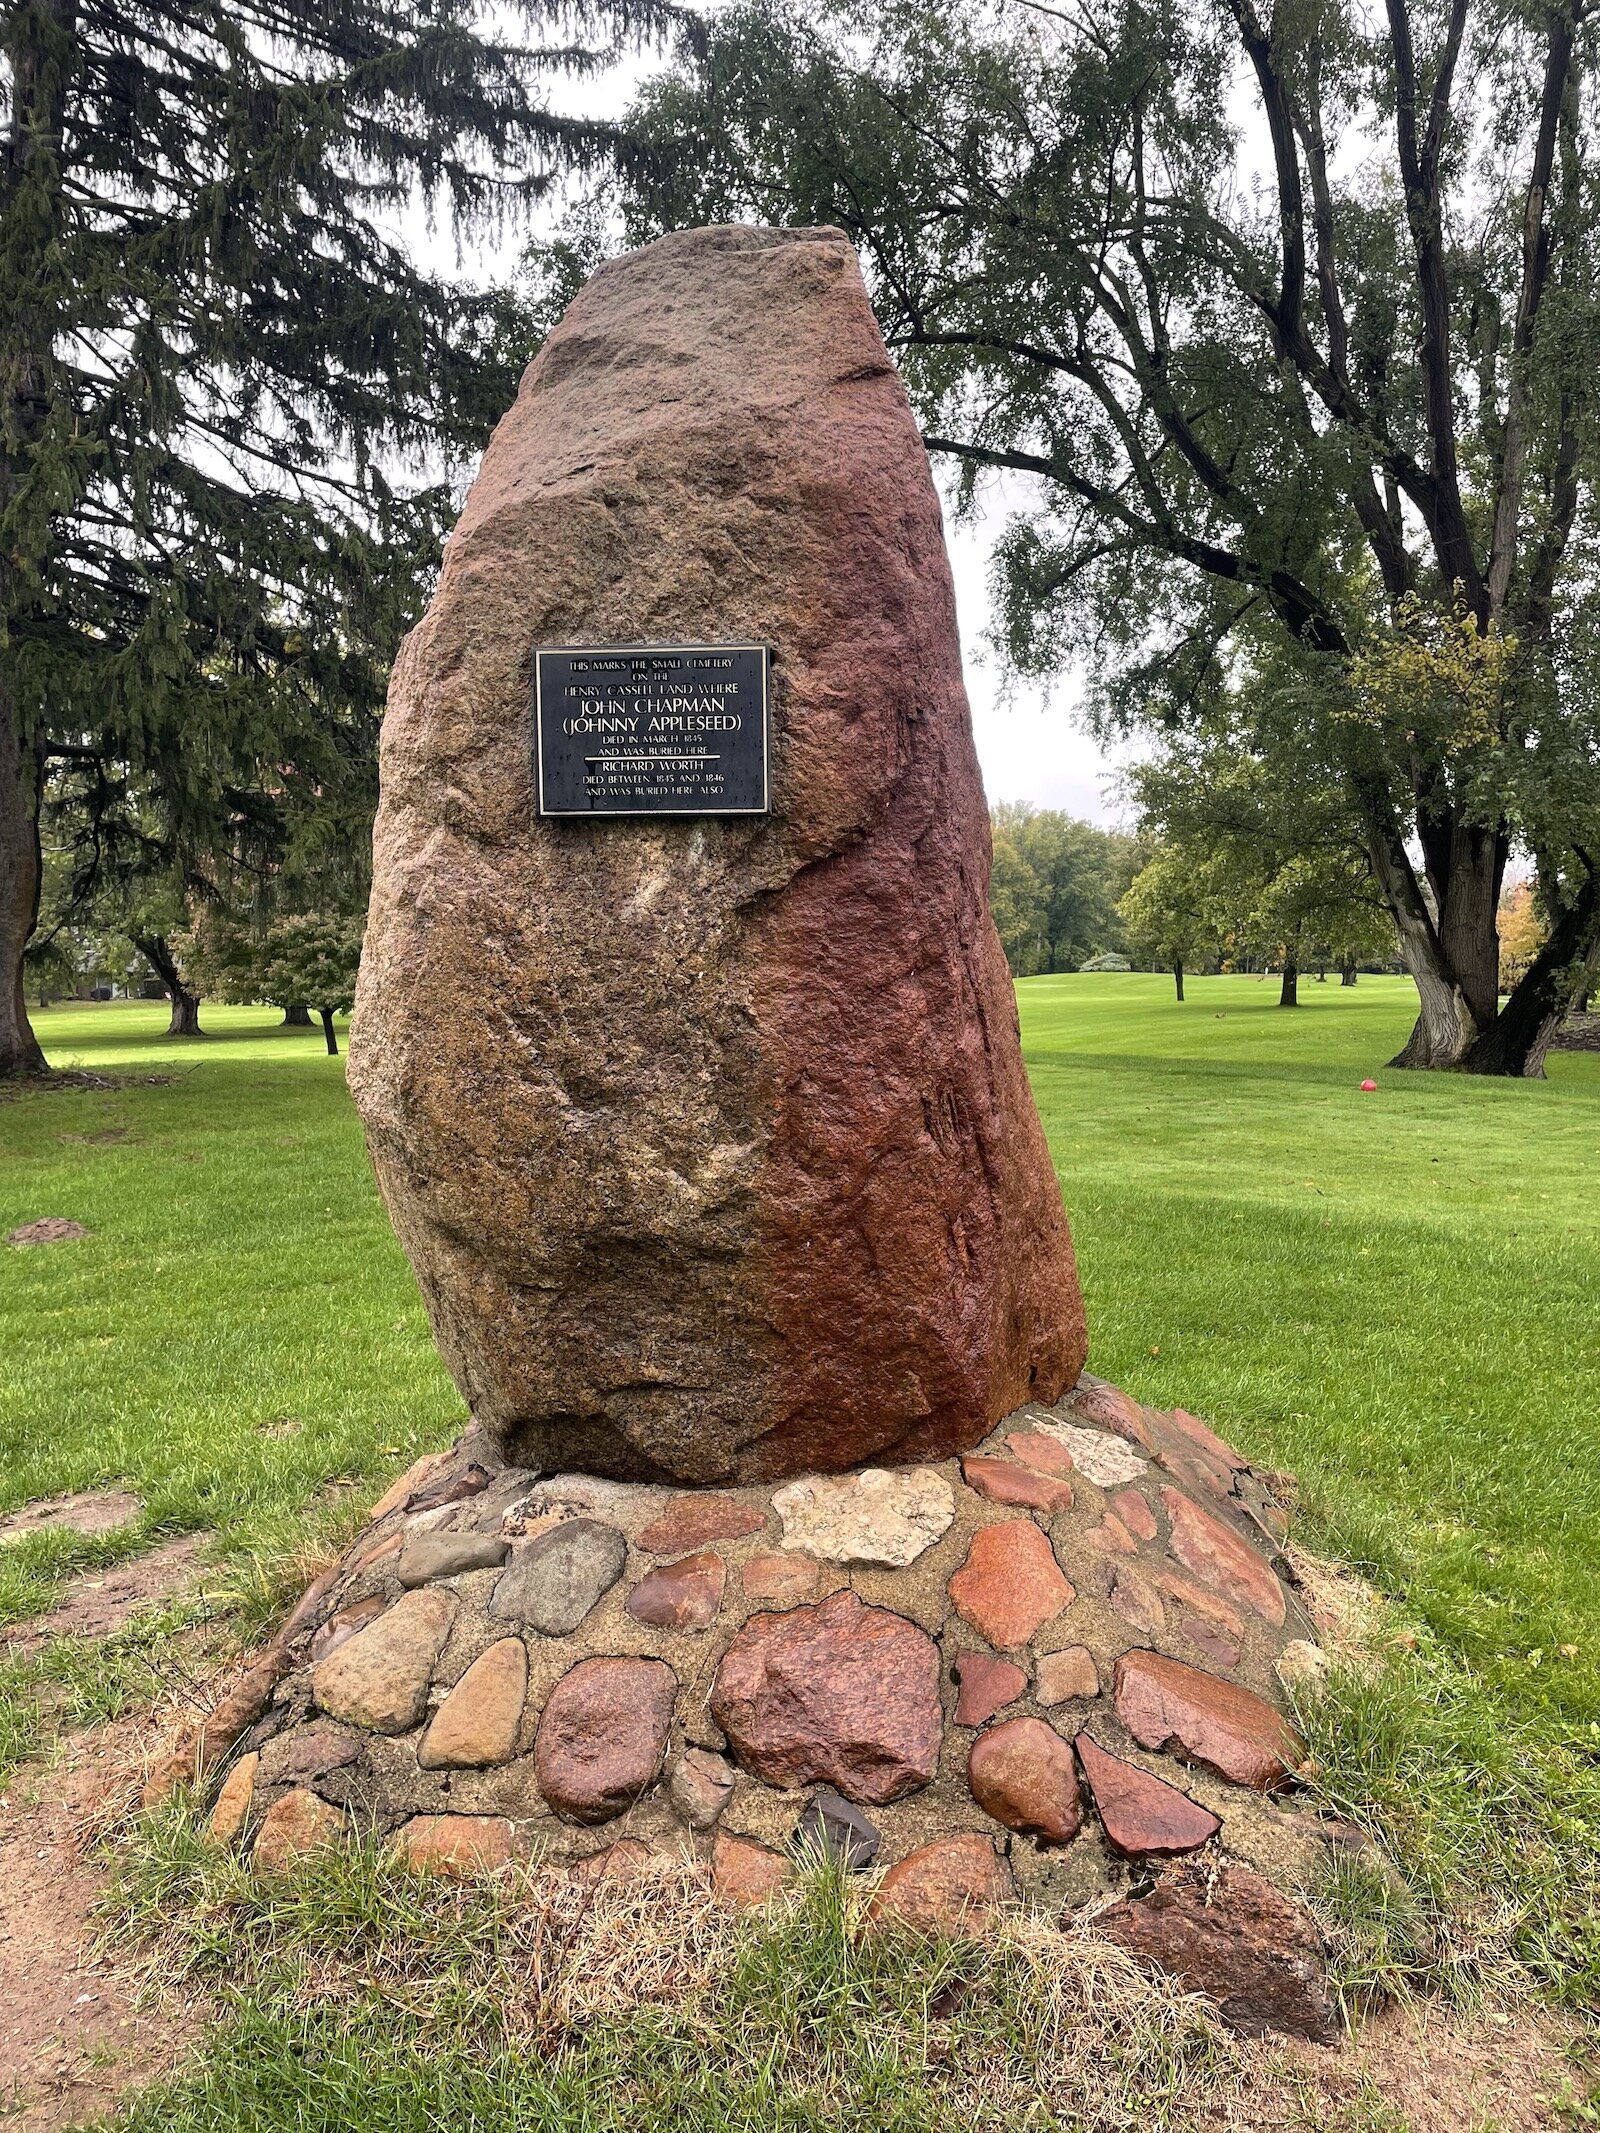 Canterbury Green lays claim to the burial site of John Chapman, known as Johnny Appleseed. Others are likely buried where the golf course now operates.